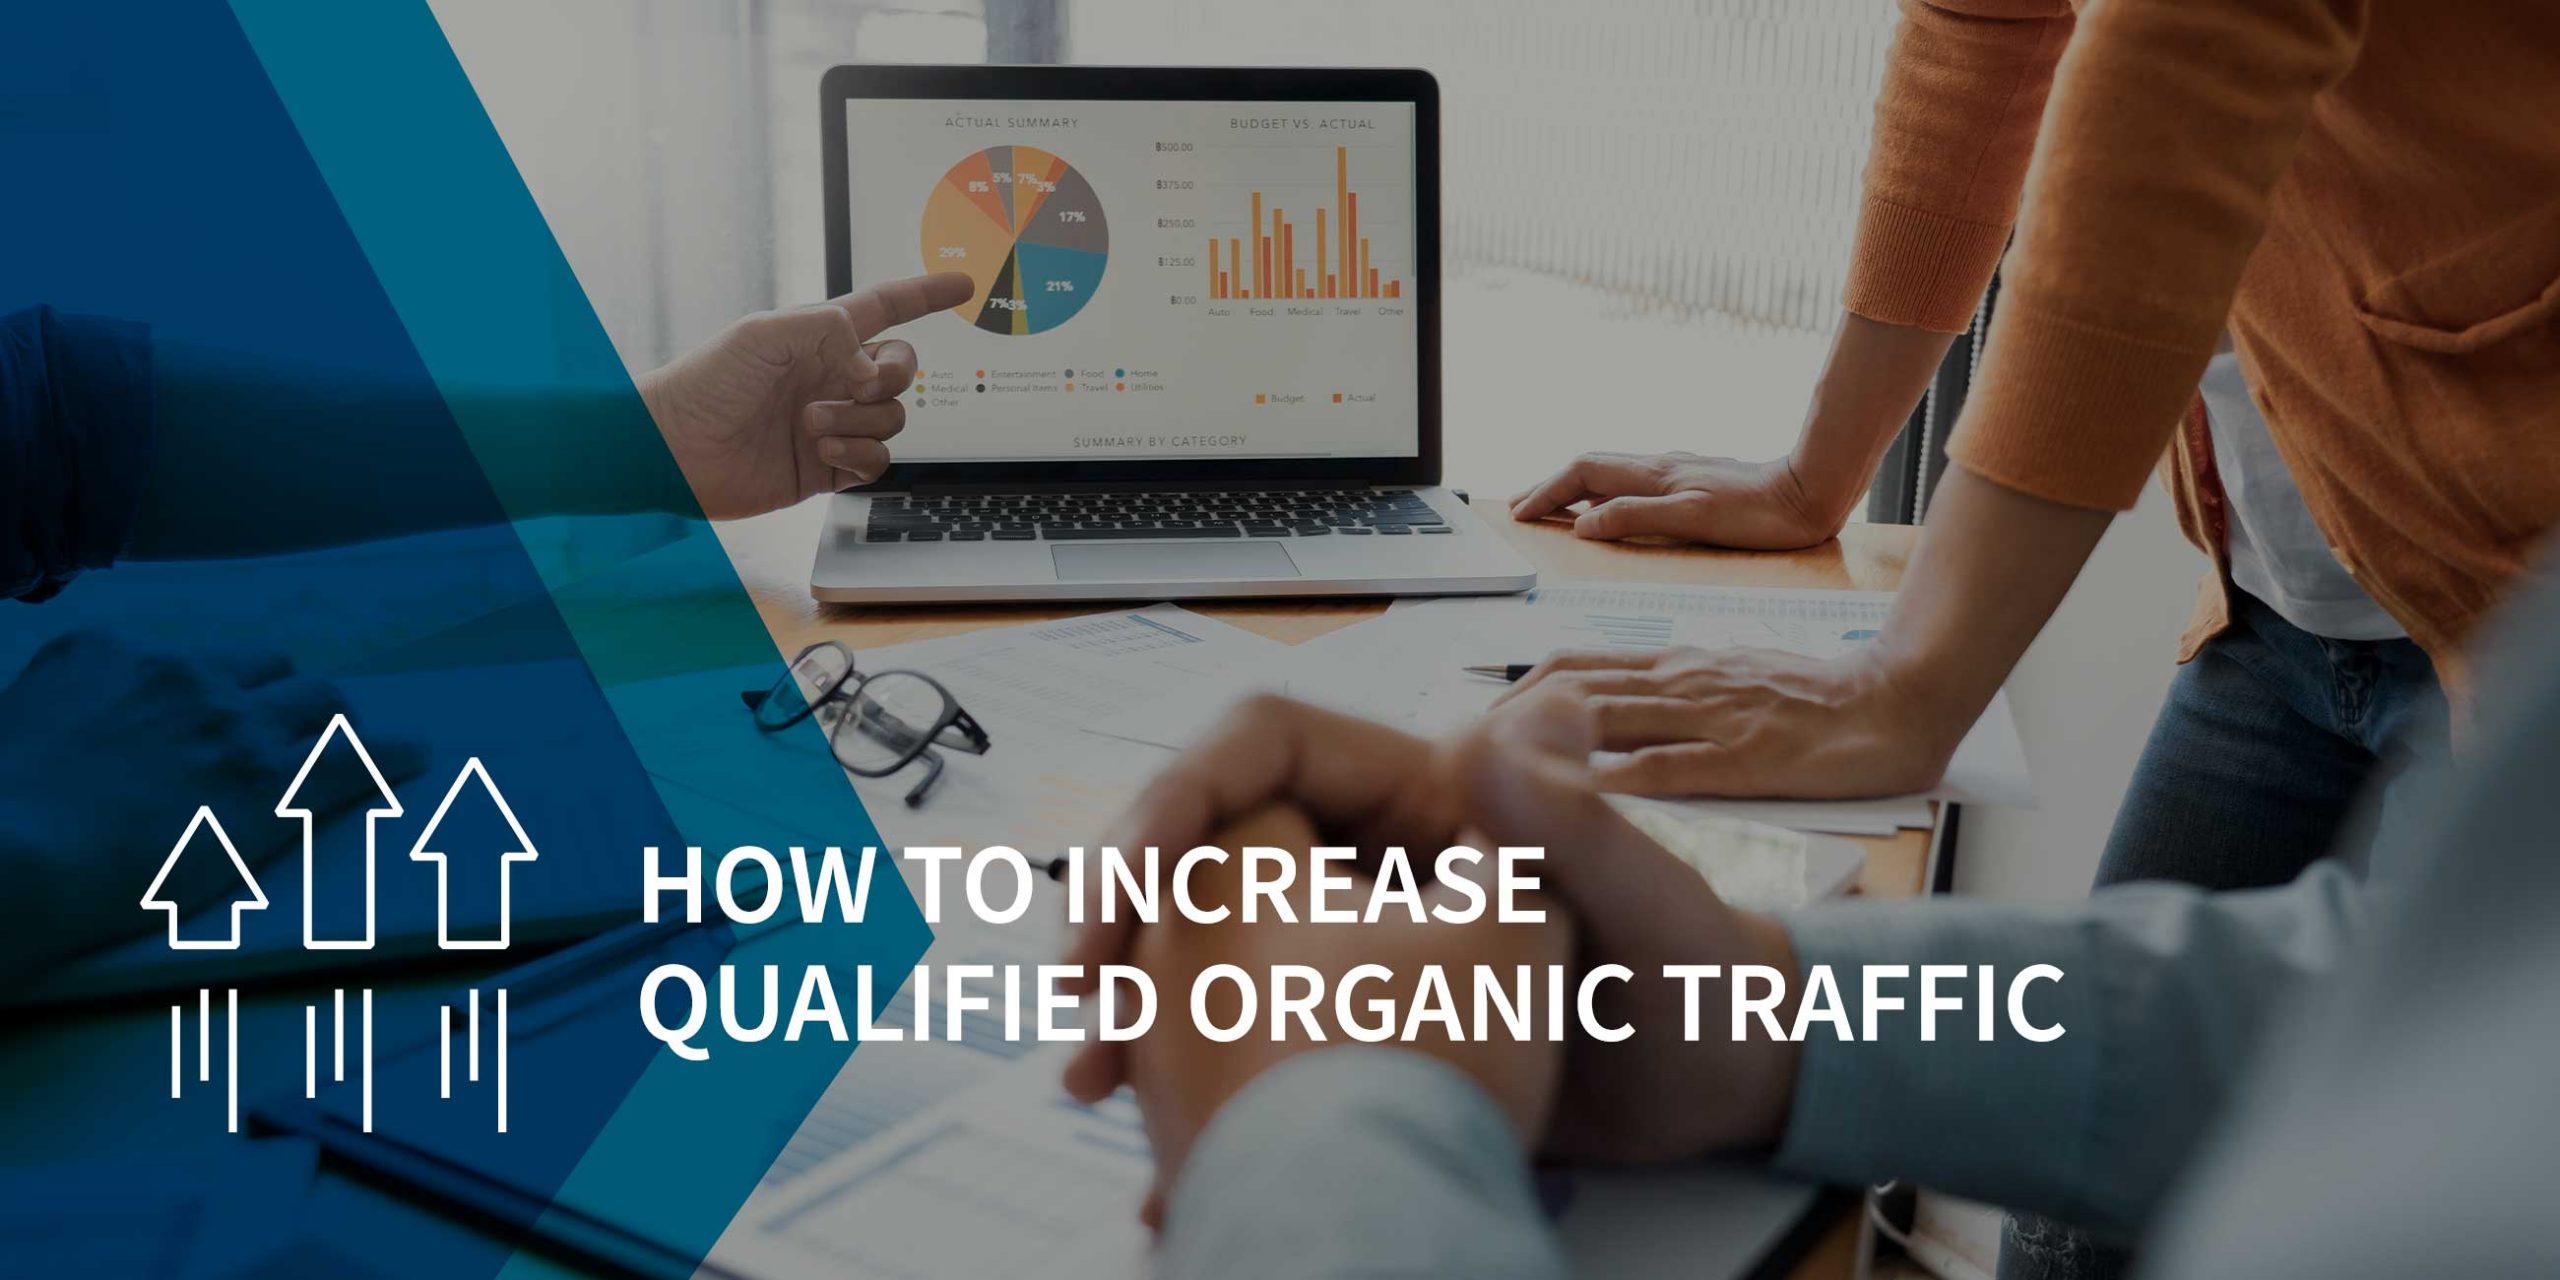 How to Increase Qualified Organic Traffic to Your Company Website